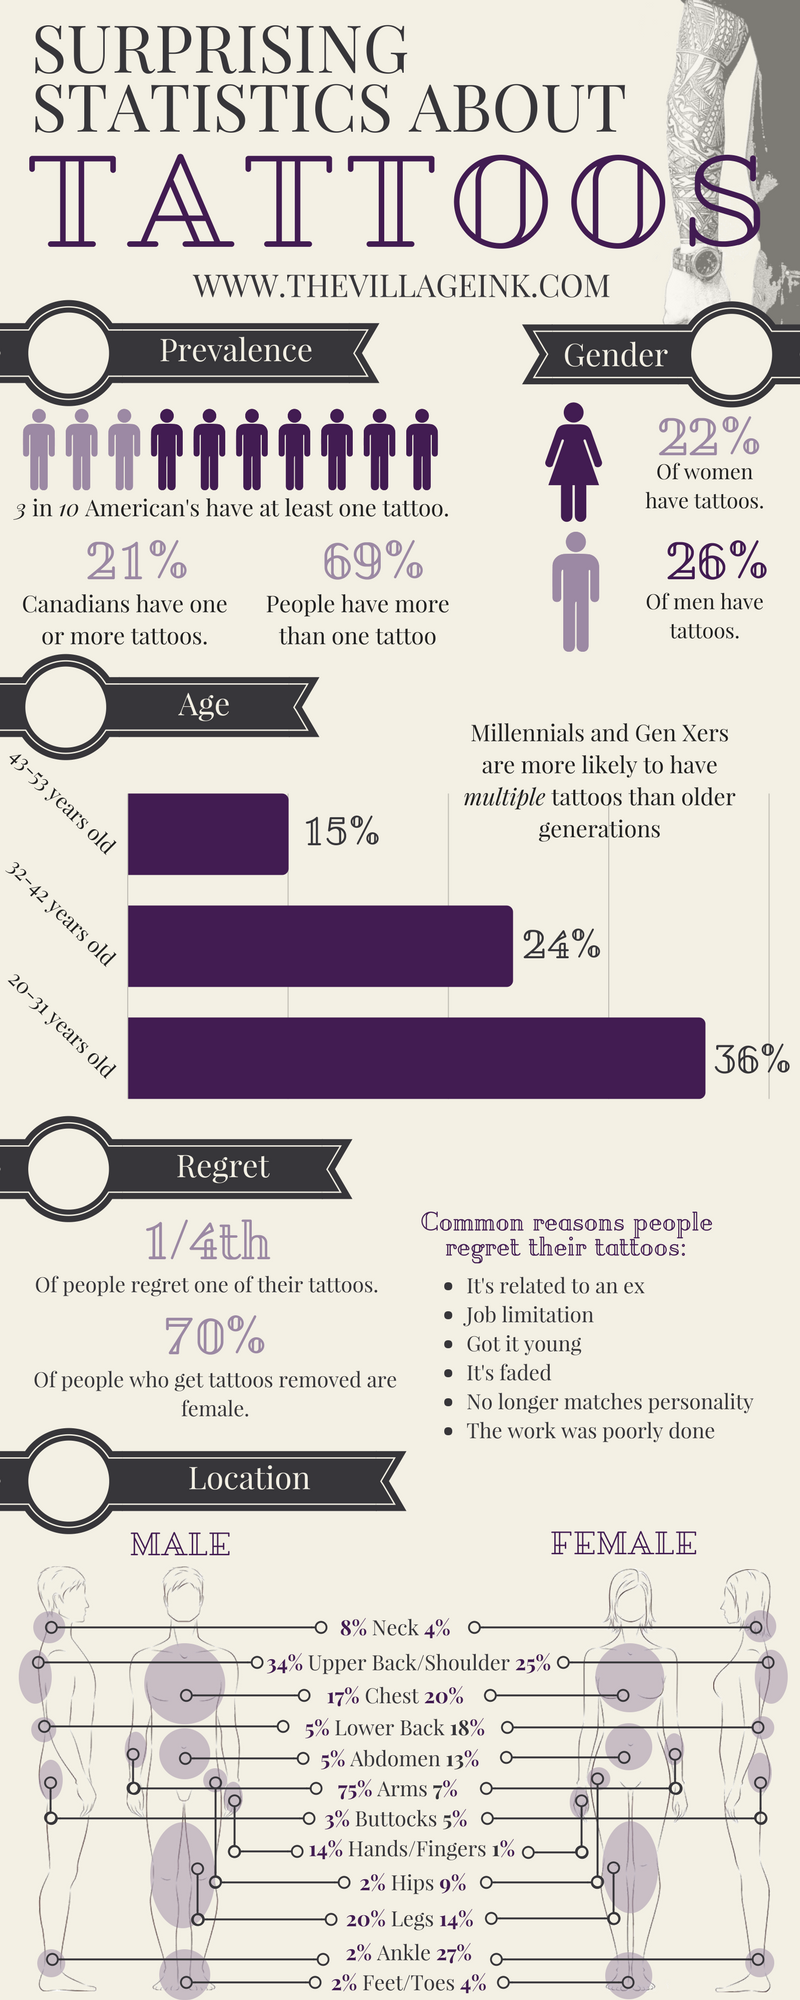 Surprising Statistics About Tattoos | Visual.ly